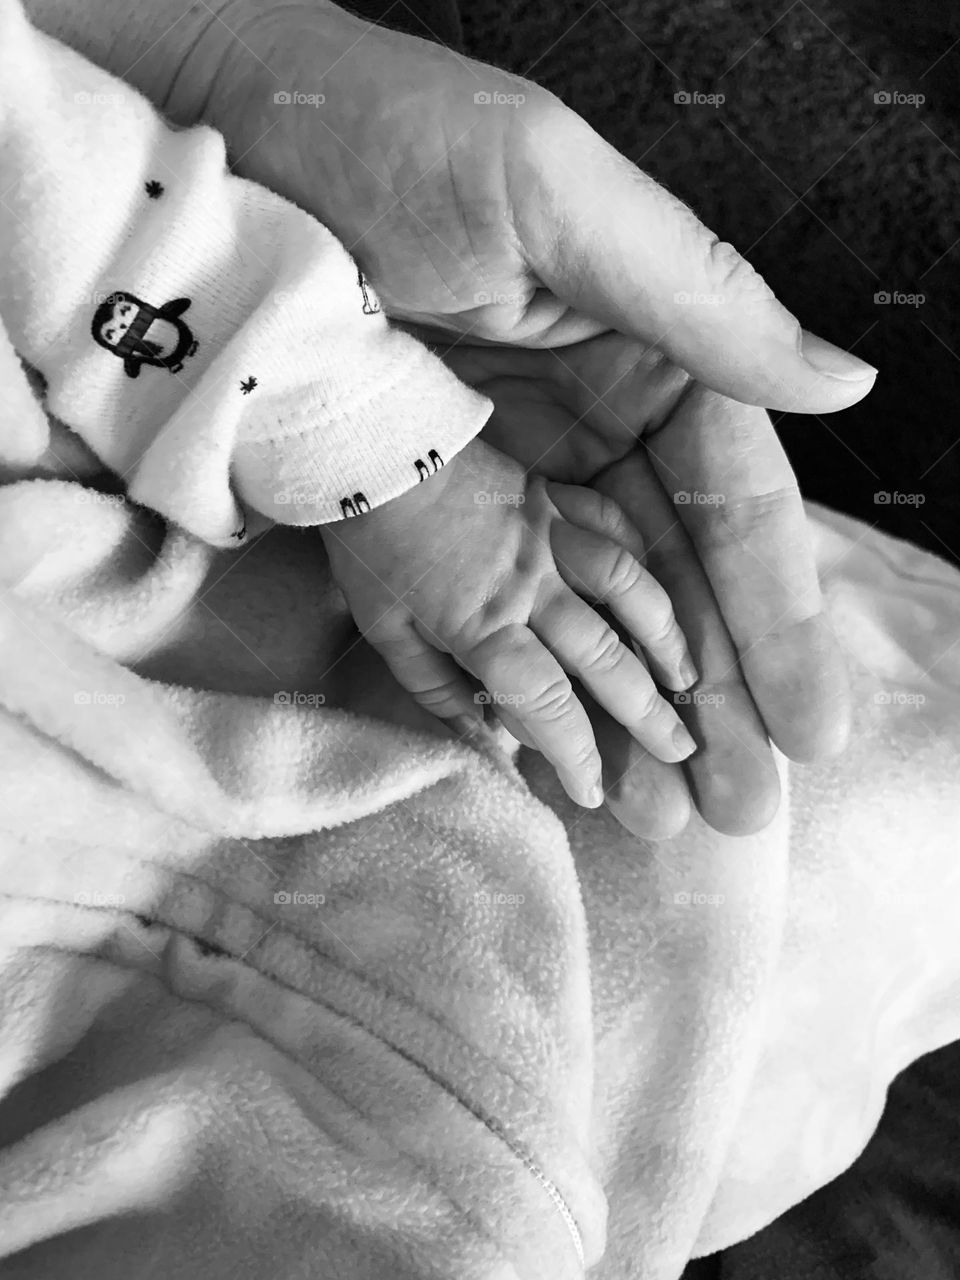 Black and white mommy hand holding baby hand as a sign of love, affection, and comfort.  Little penguin on baby’s pajamas.  Precious little life